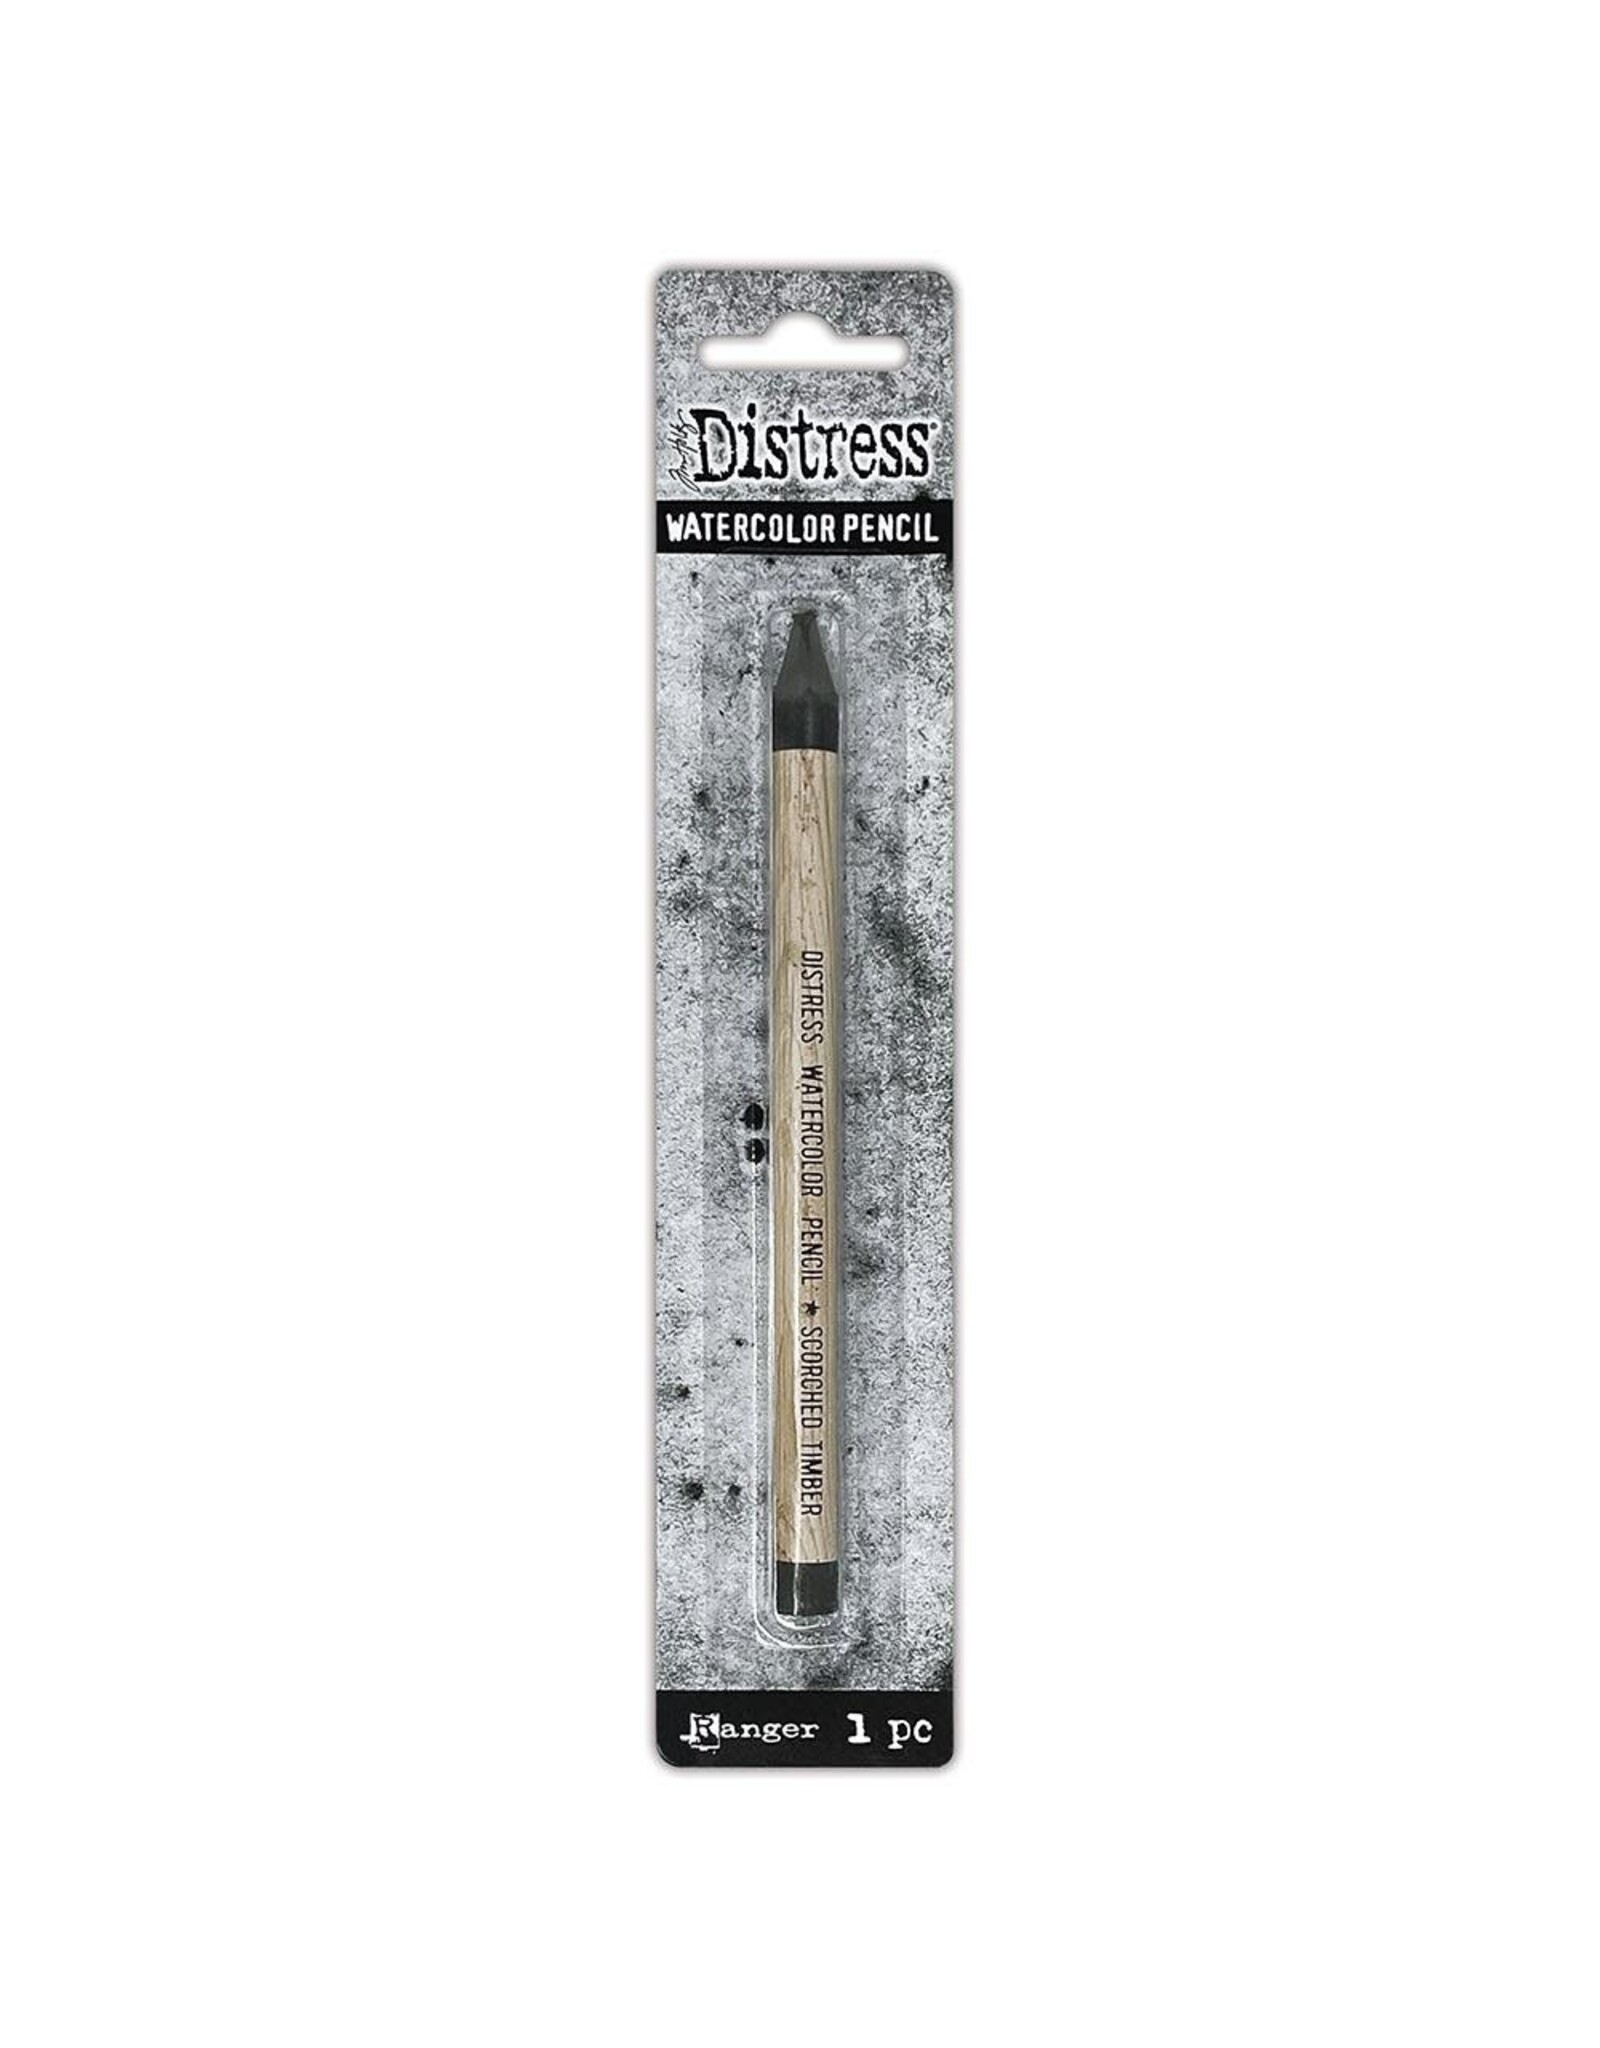 RANGER TIM HOLTZ DISTRESS WATERCOLOR PENCIL SCORCHED TIMBER